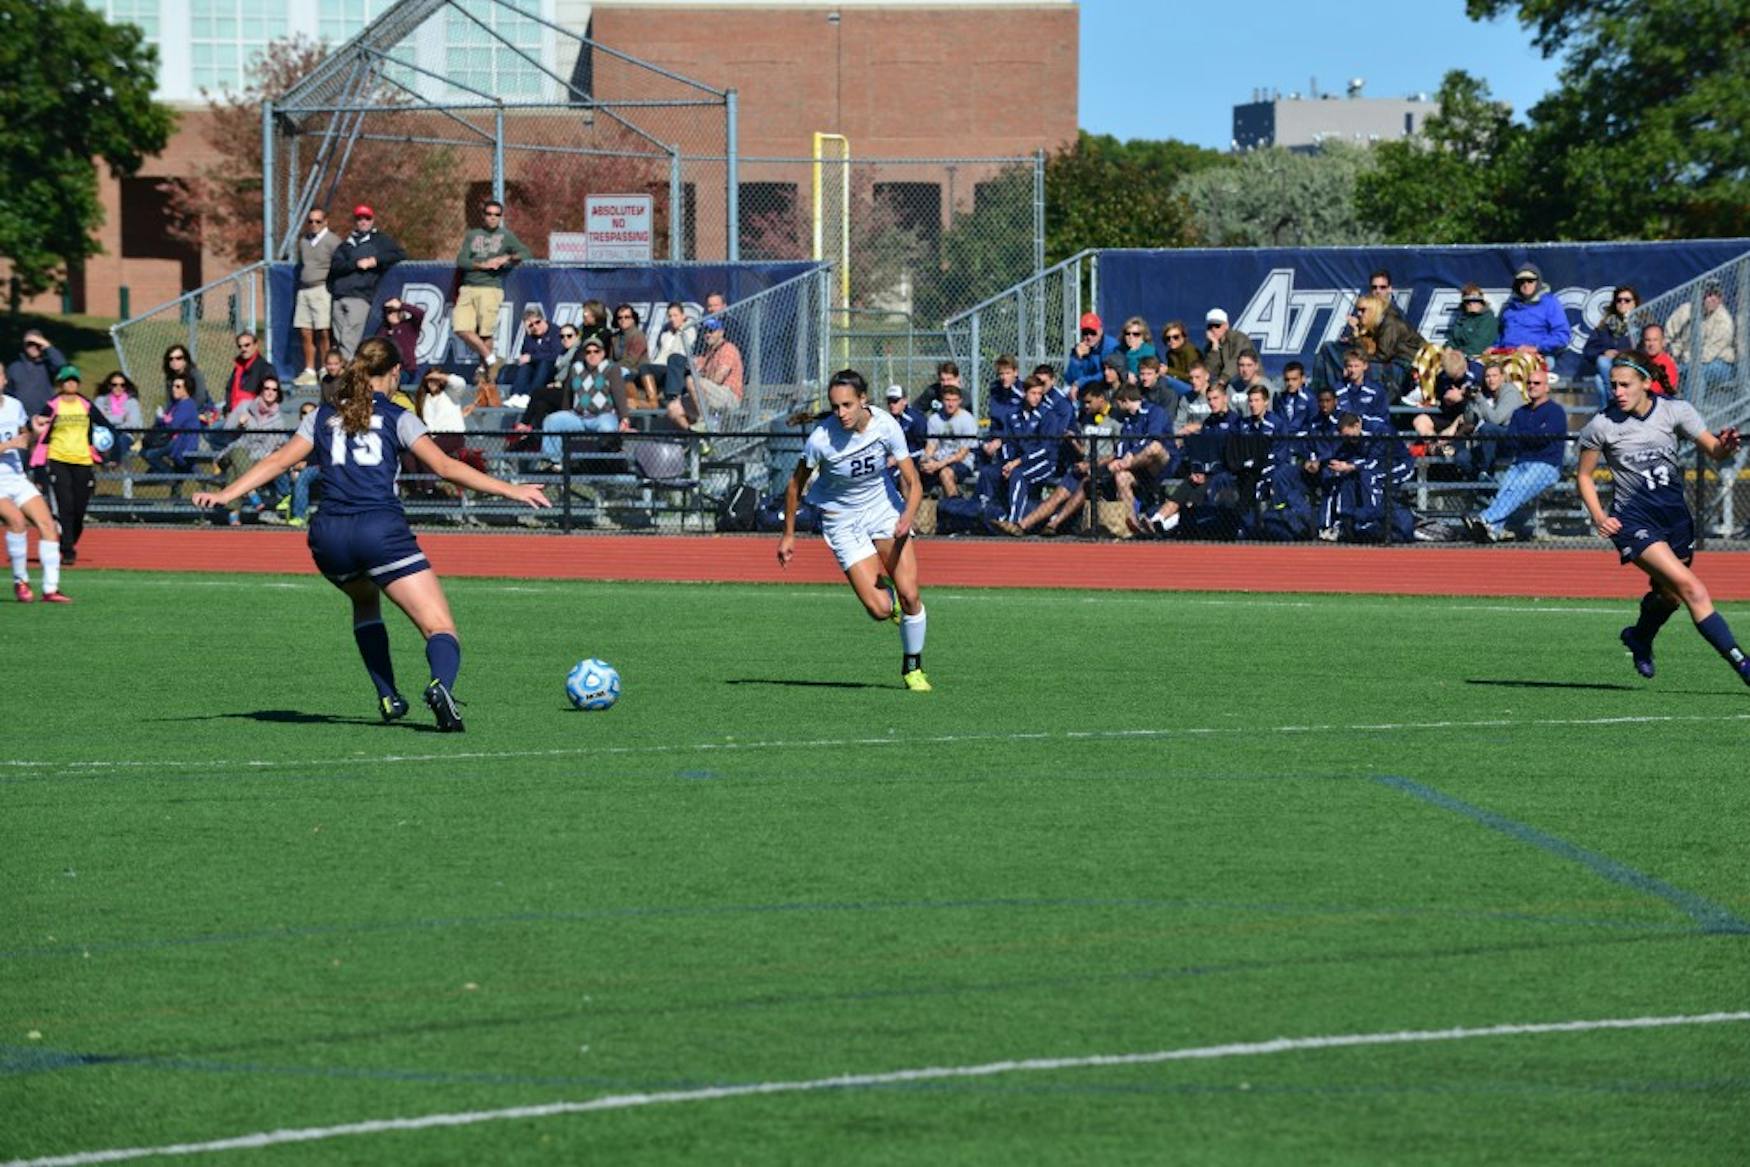 HEADS UP: Forward Melissa Darling '16 sprints forward during the team's 1-0 win over Case Western Reserve University on Sunday.